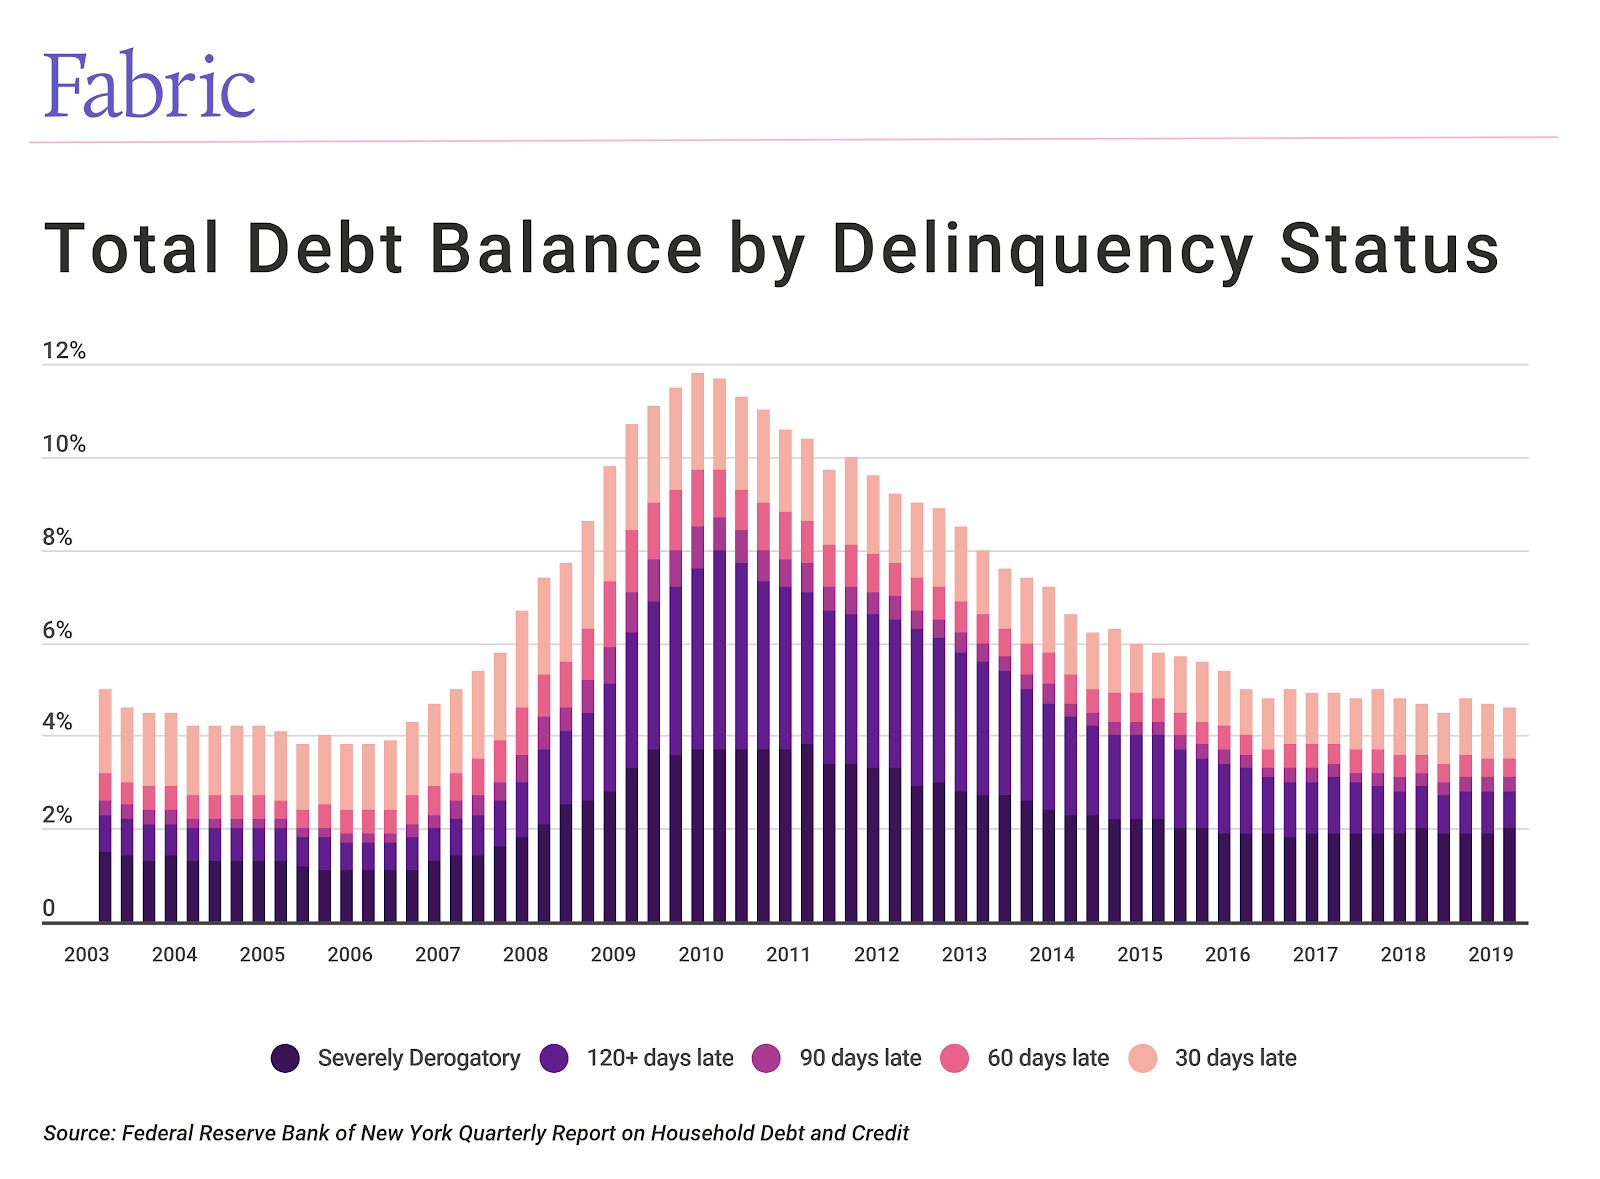 Americans' total debt balance by delinquency status